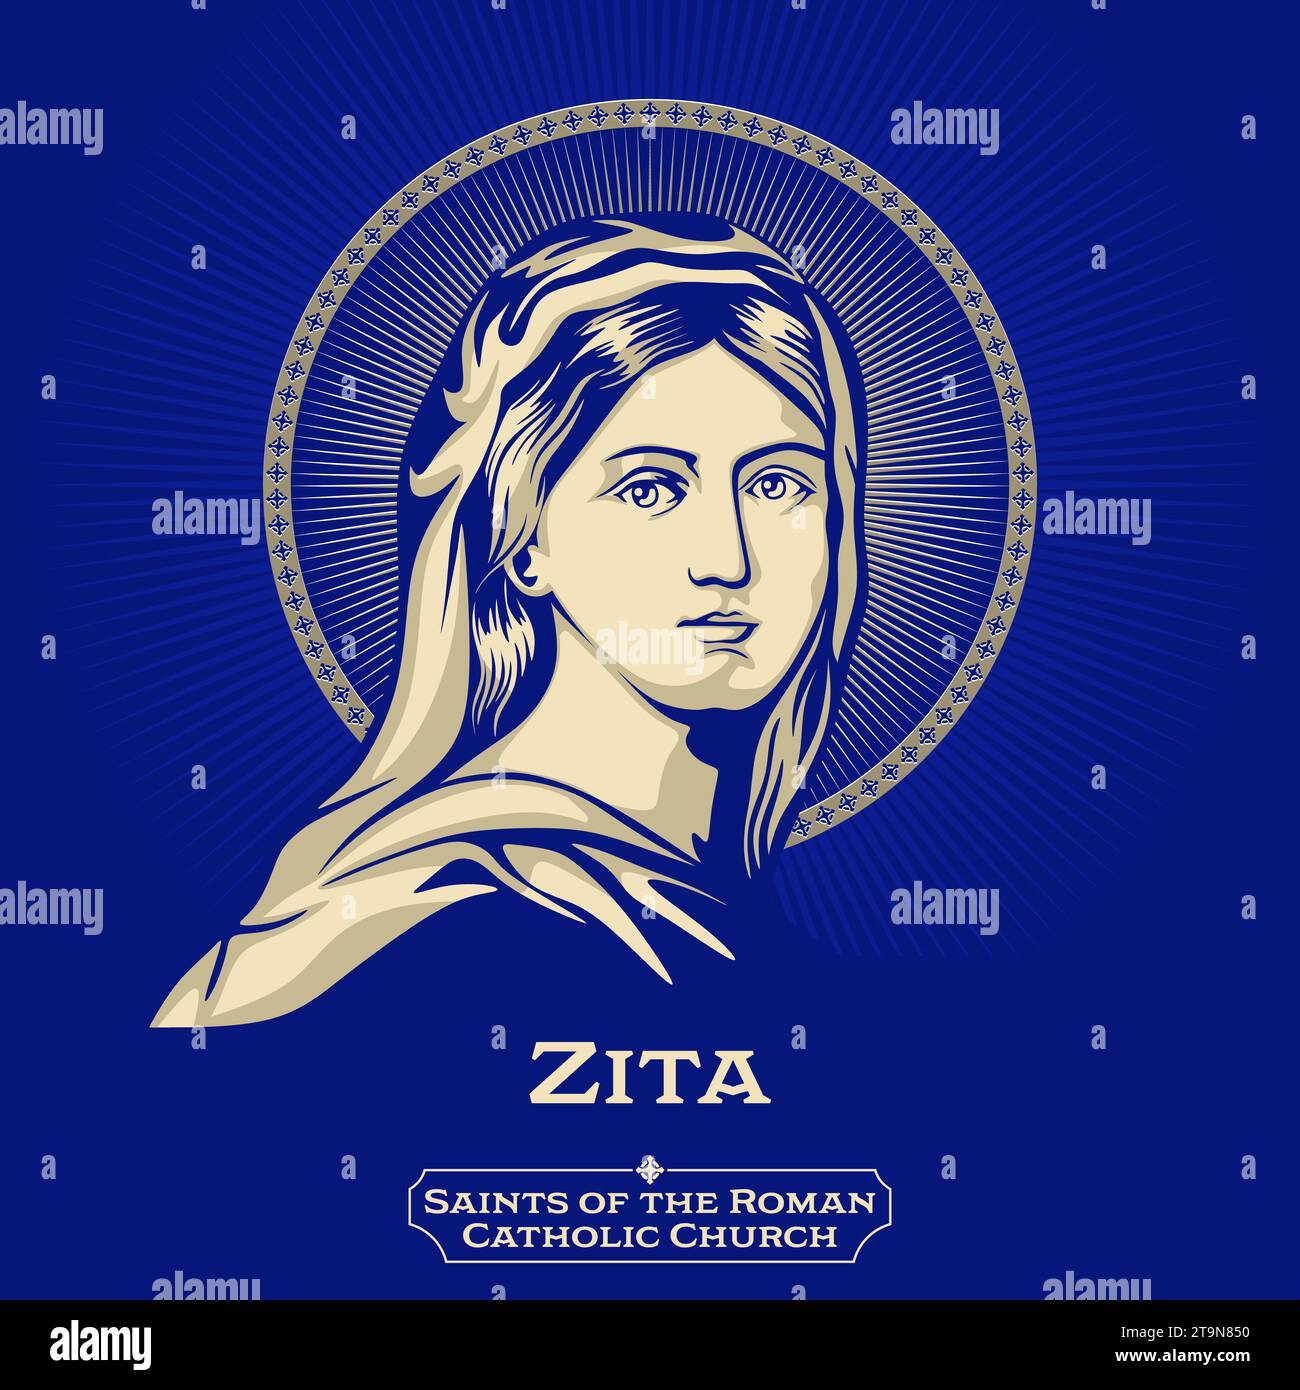 Catholic Saints. Zita (1212-1272) also known as Sitha or Citha, was an Italian saint, the patron saint of maids and domestic servants. Stock Vector